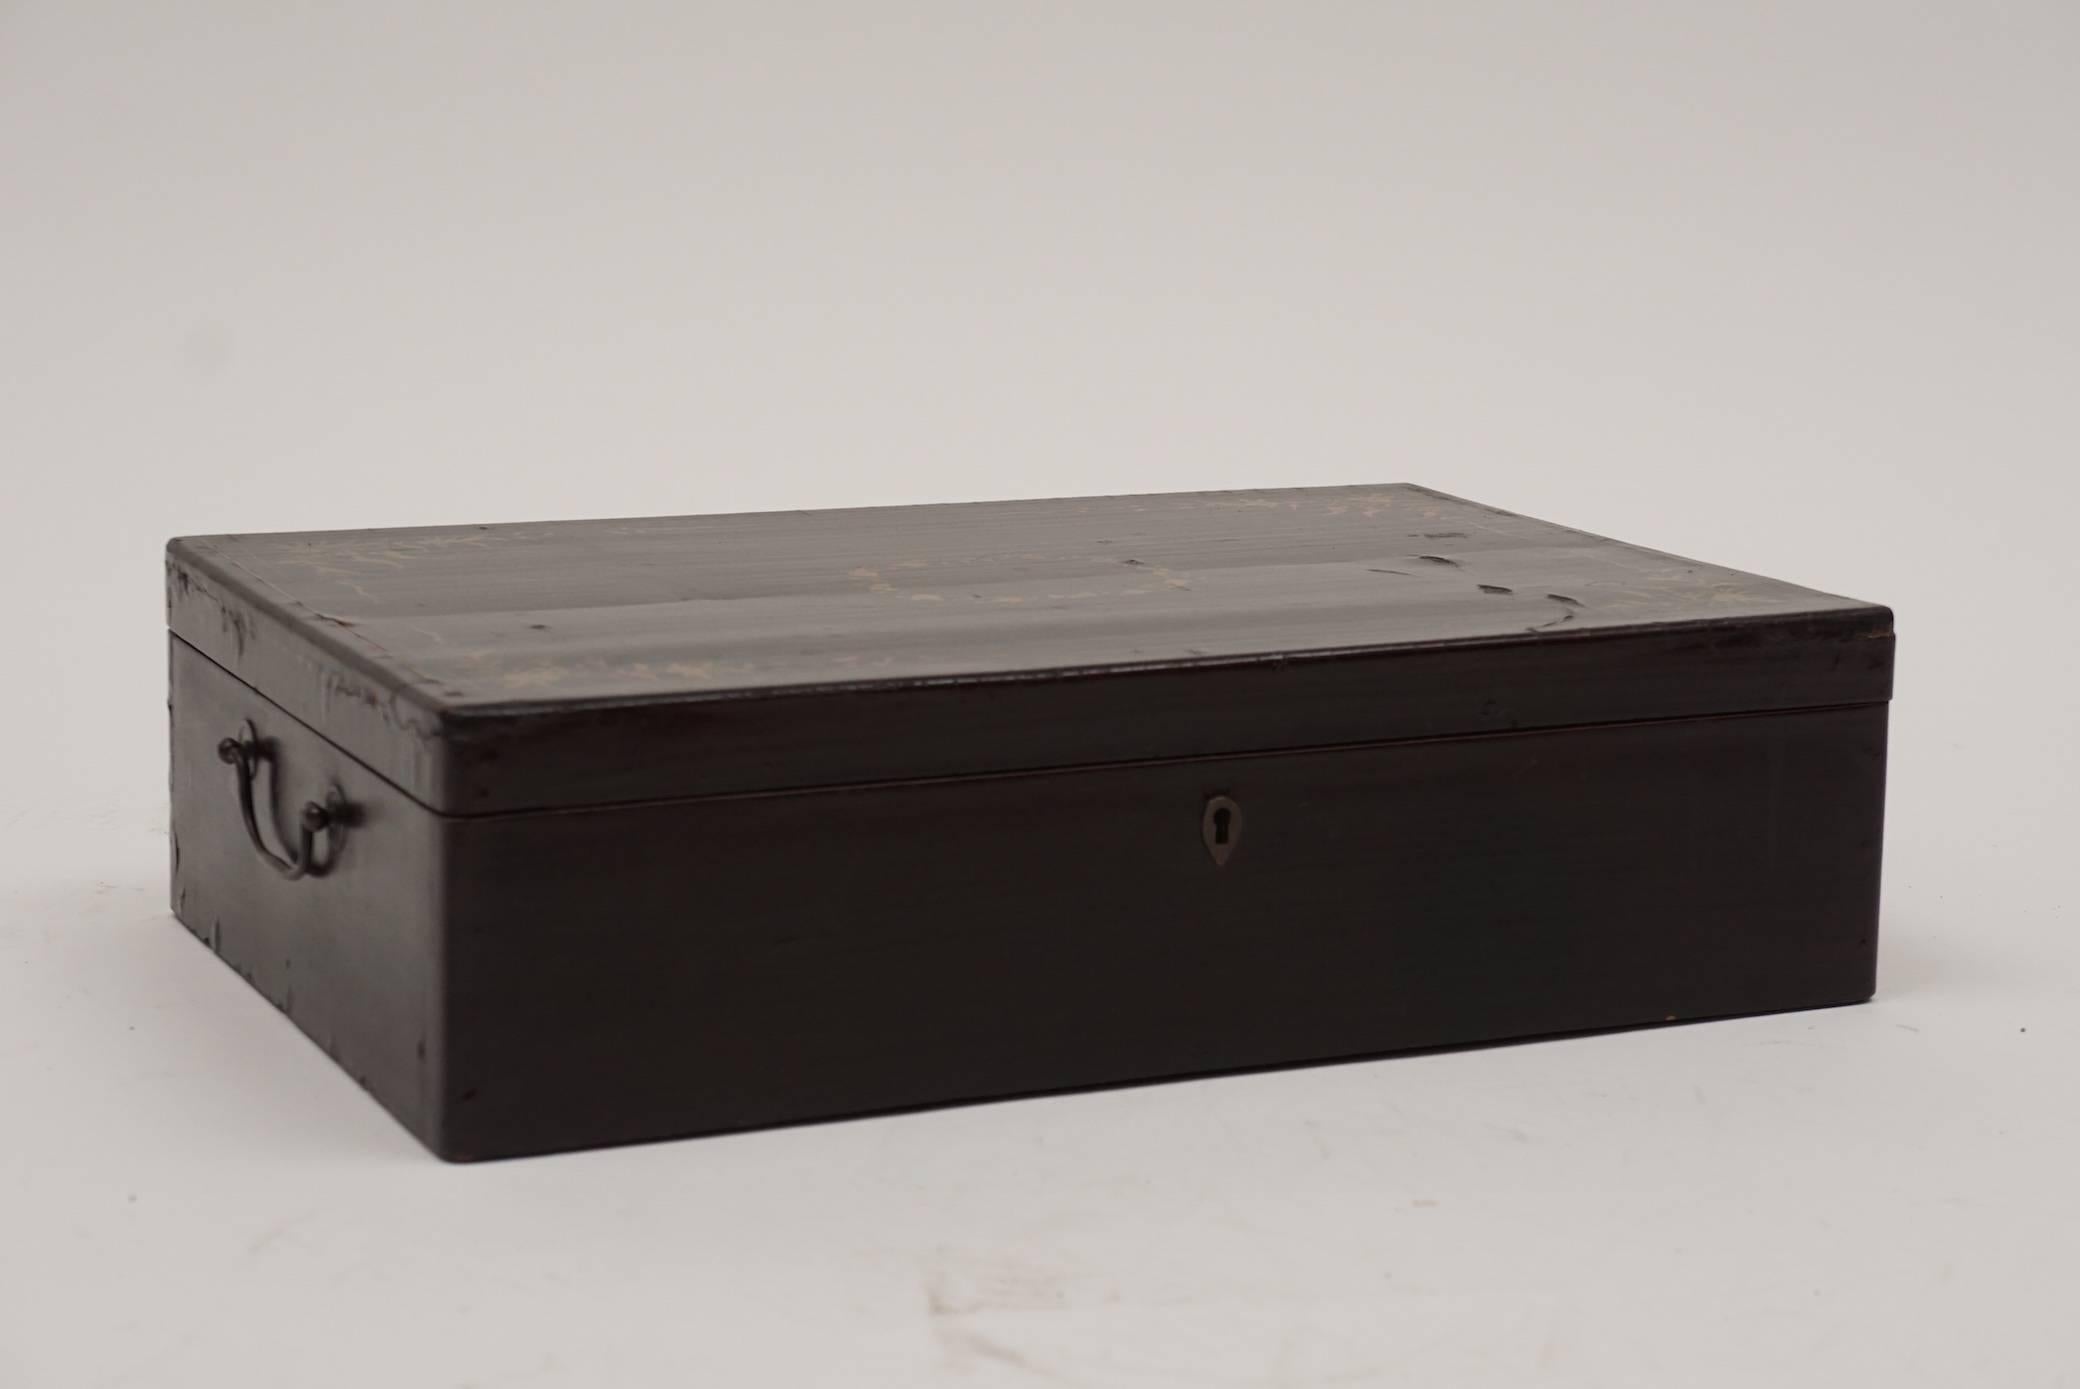 Chinese Export Lacquer Document Box In Good Condition For Sale In Hudson, NY